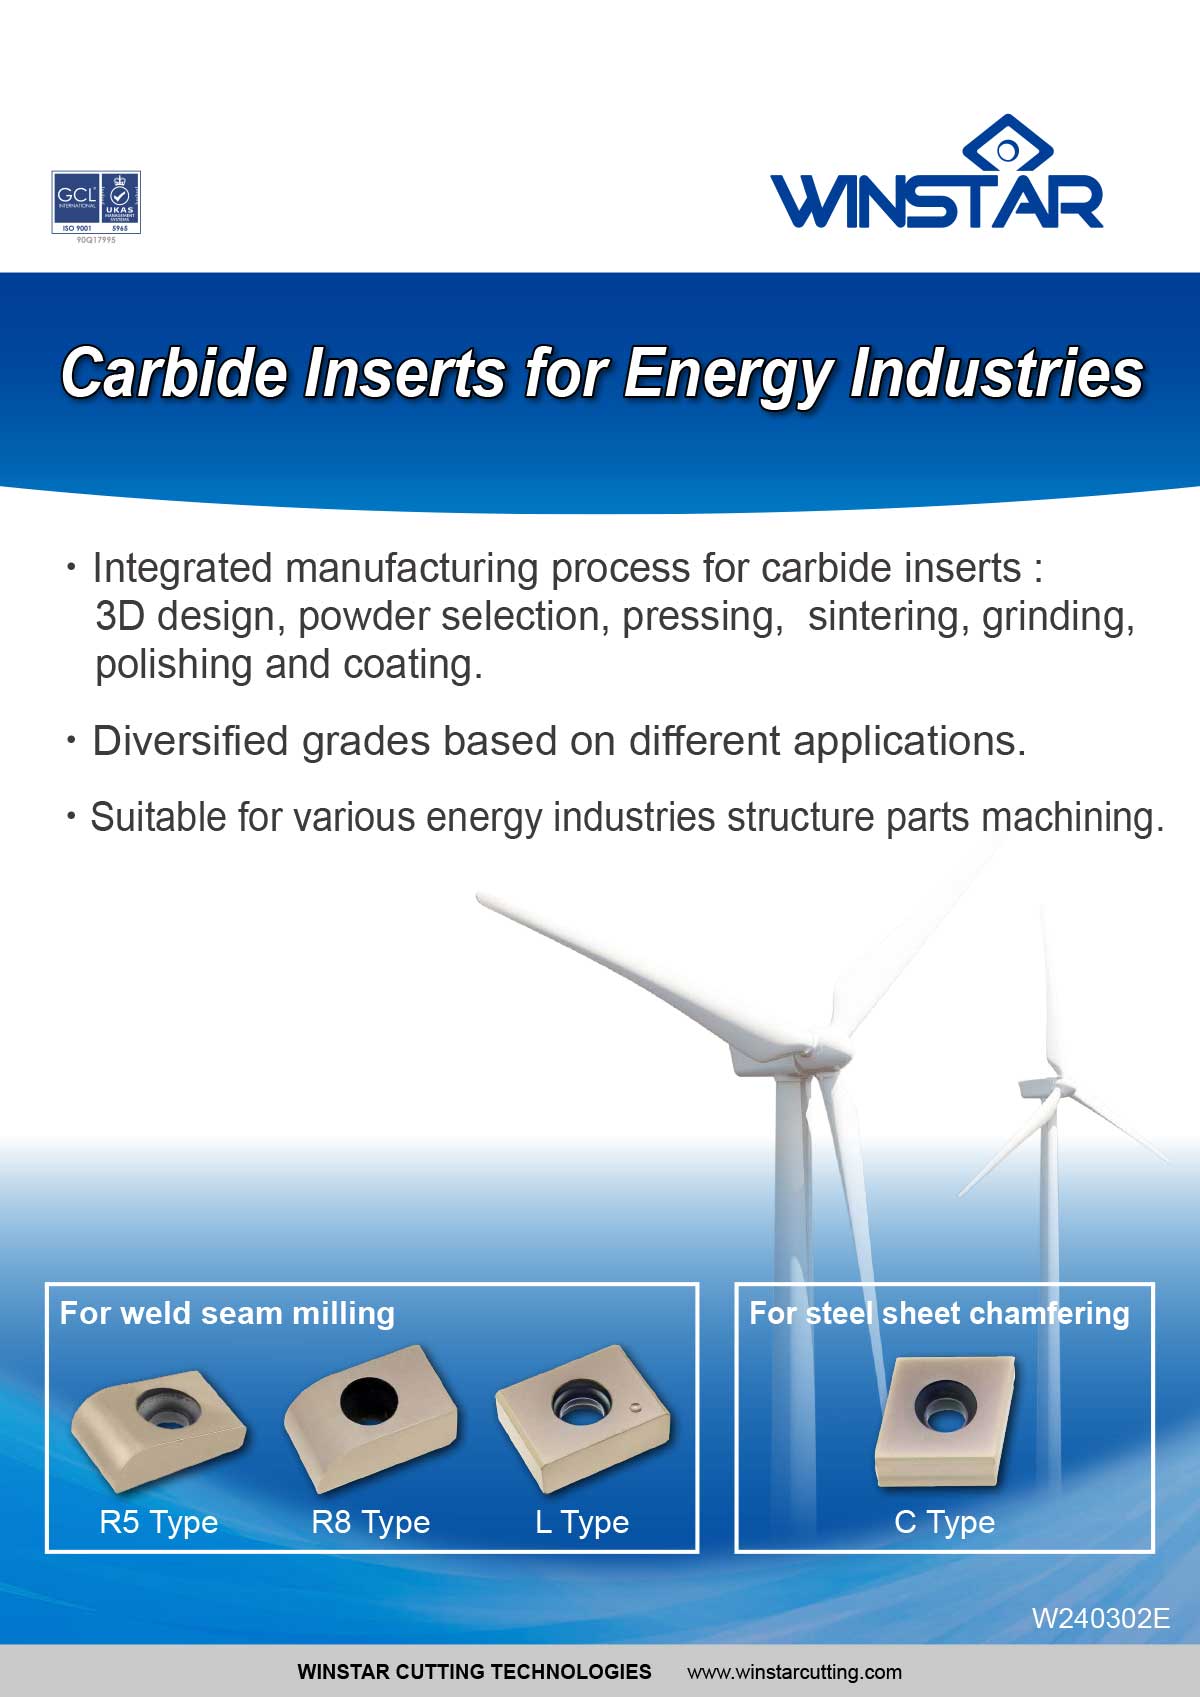 Winstar Carbide Inserts for Energy Industries